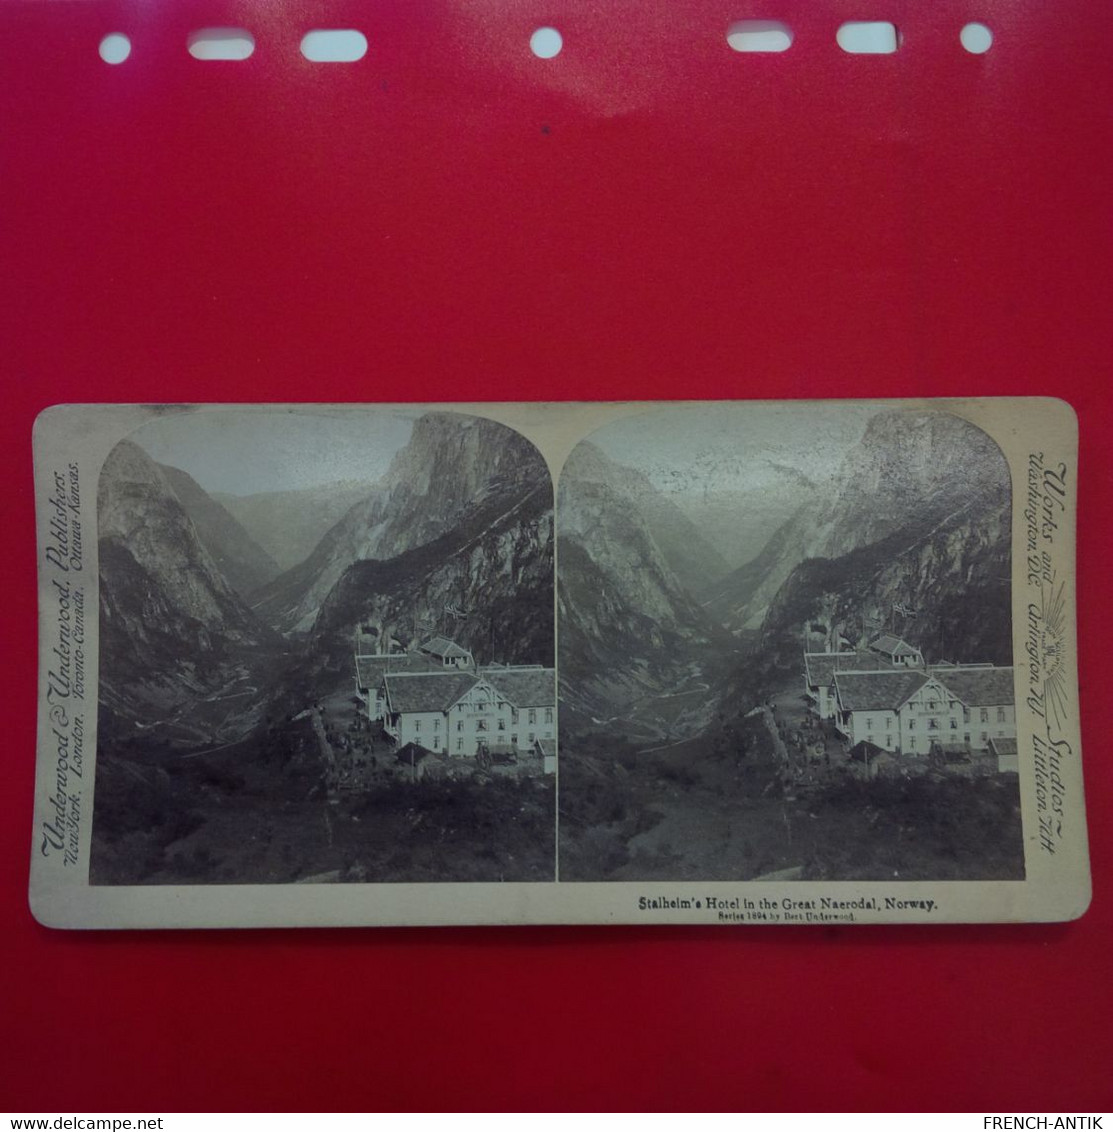 PHOTO STEREO STALHELM S HOTEL IN THE GREAT NAERODAL NORWAY - Stereoscopic